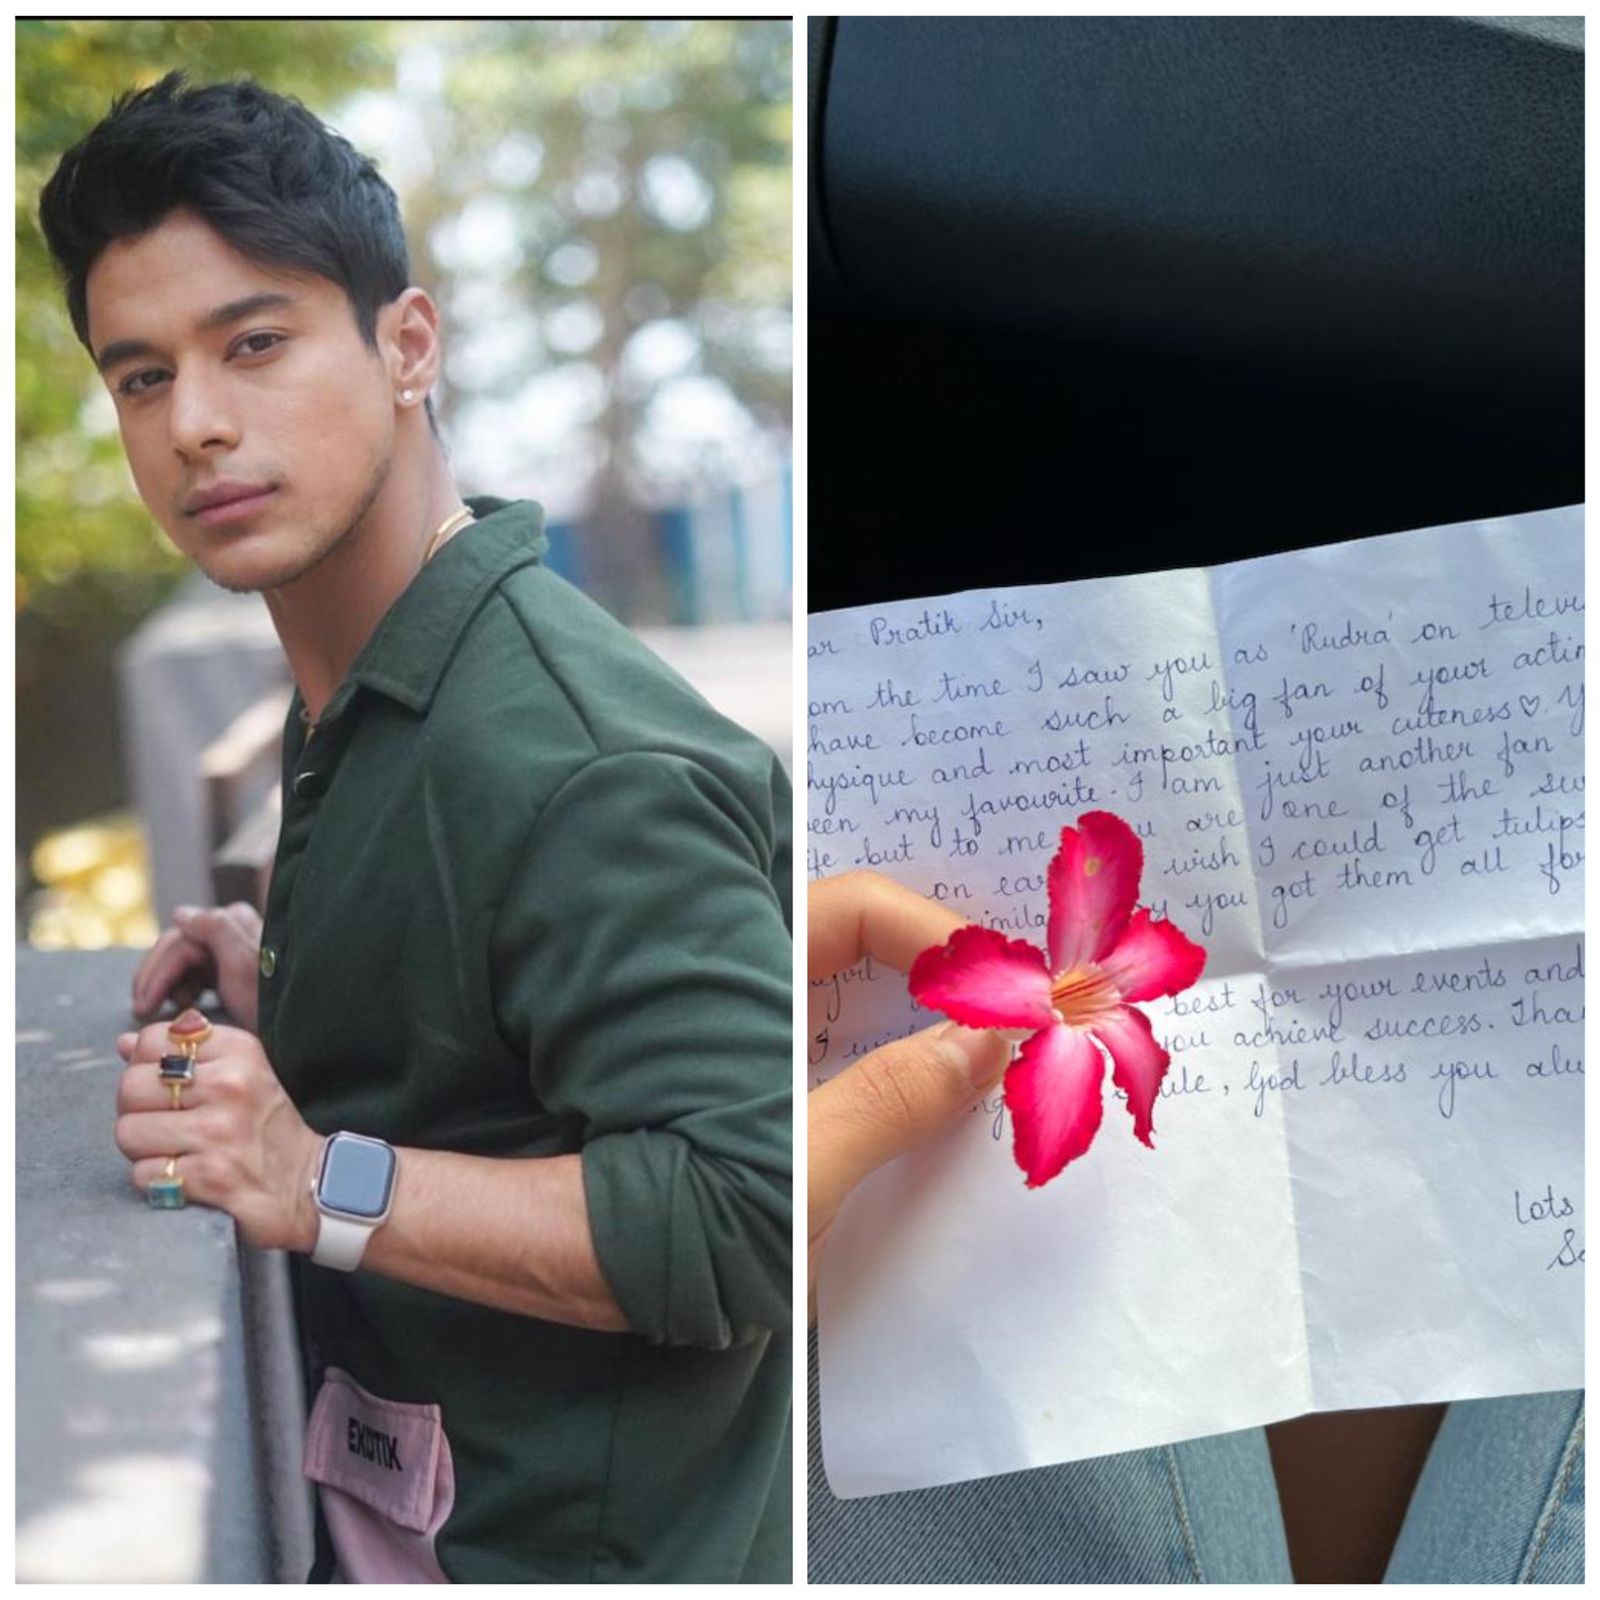 Naagin 6 fame Pratik Sehajpal receives a heart-warming letter from a fan while shooting in Goa; fan says “To me you are one of the sweetest people on earth”*